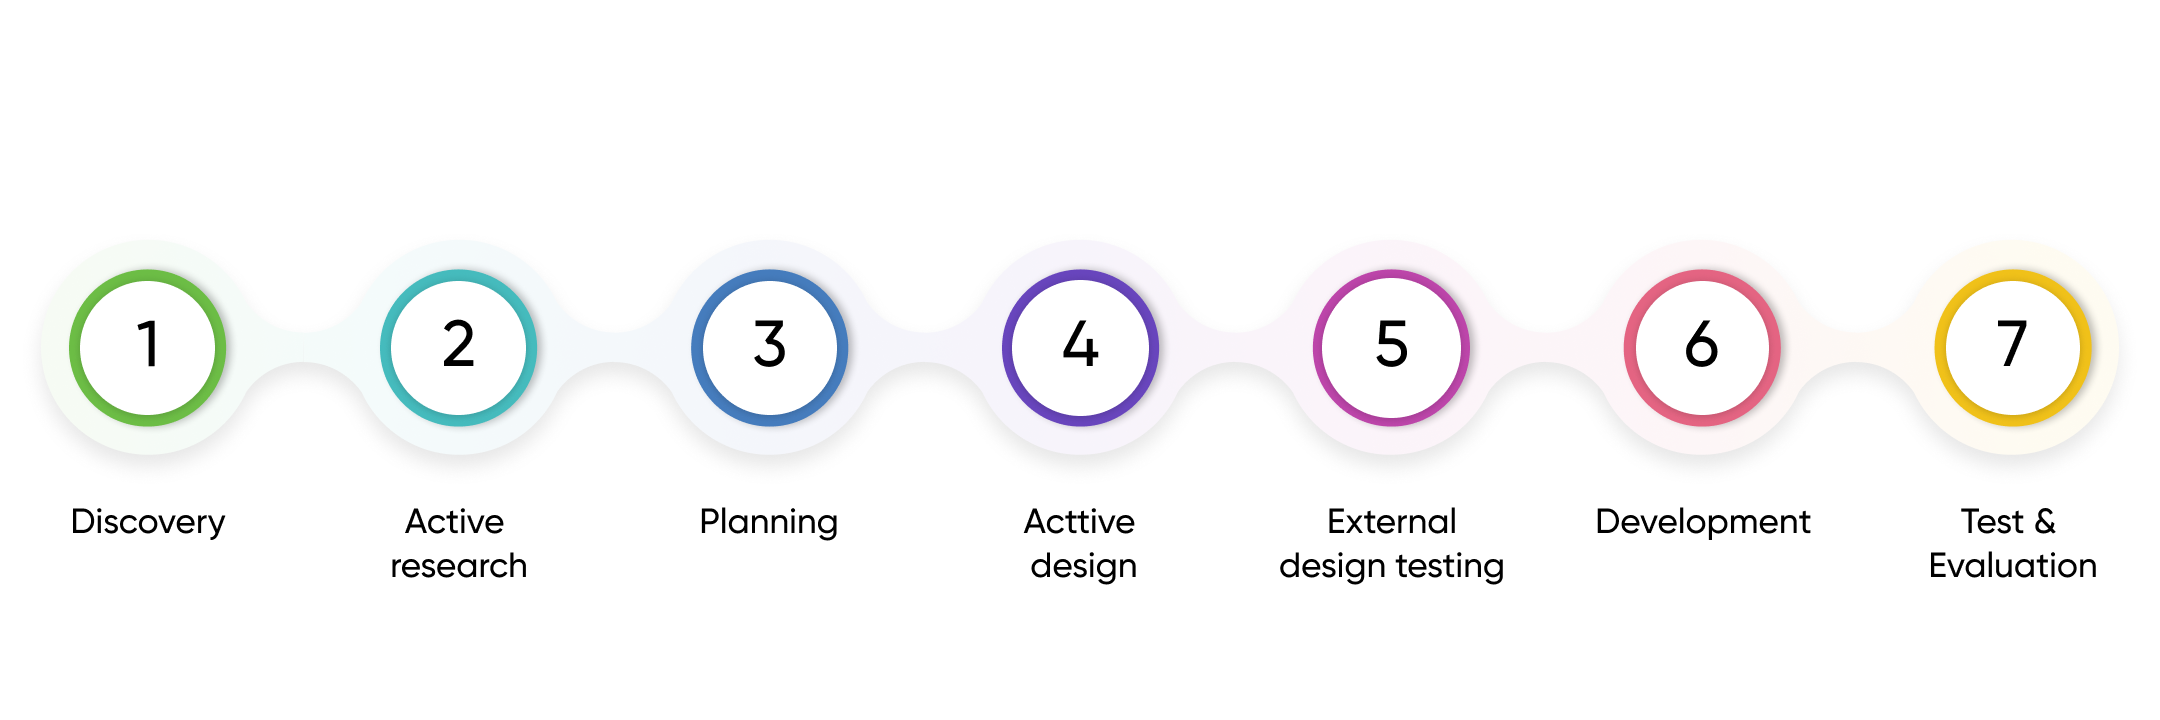 Ideal Product Design Process: 7 Steps to Perfection 2